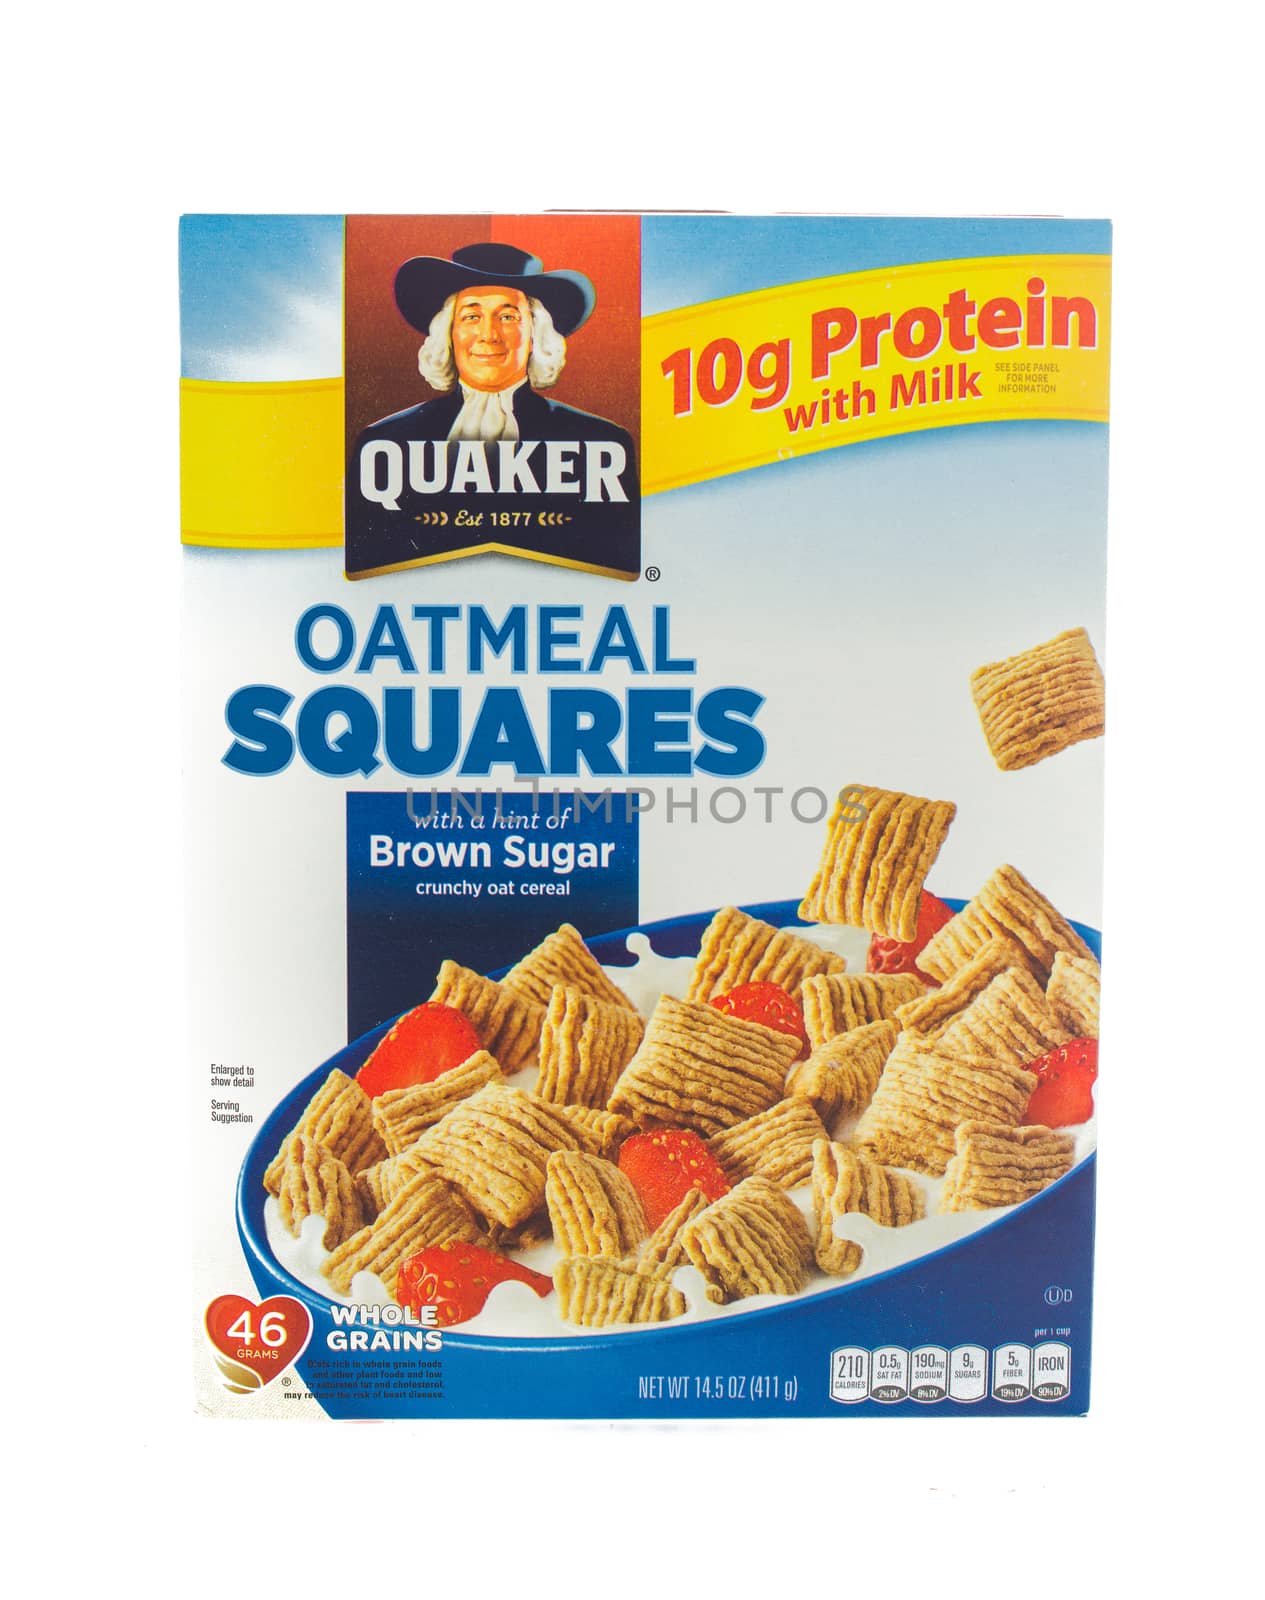 Winneconne, WI - 5  February 2015: Box of Oatmeal Squares cereal.  Oatmeal Squares is owned by the Quacker Oats Comapny.